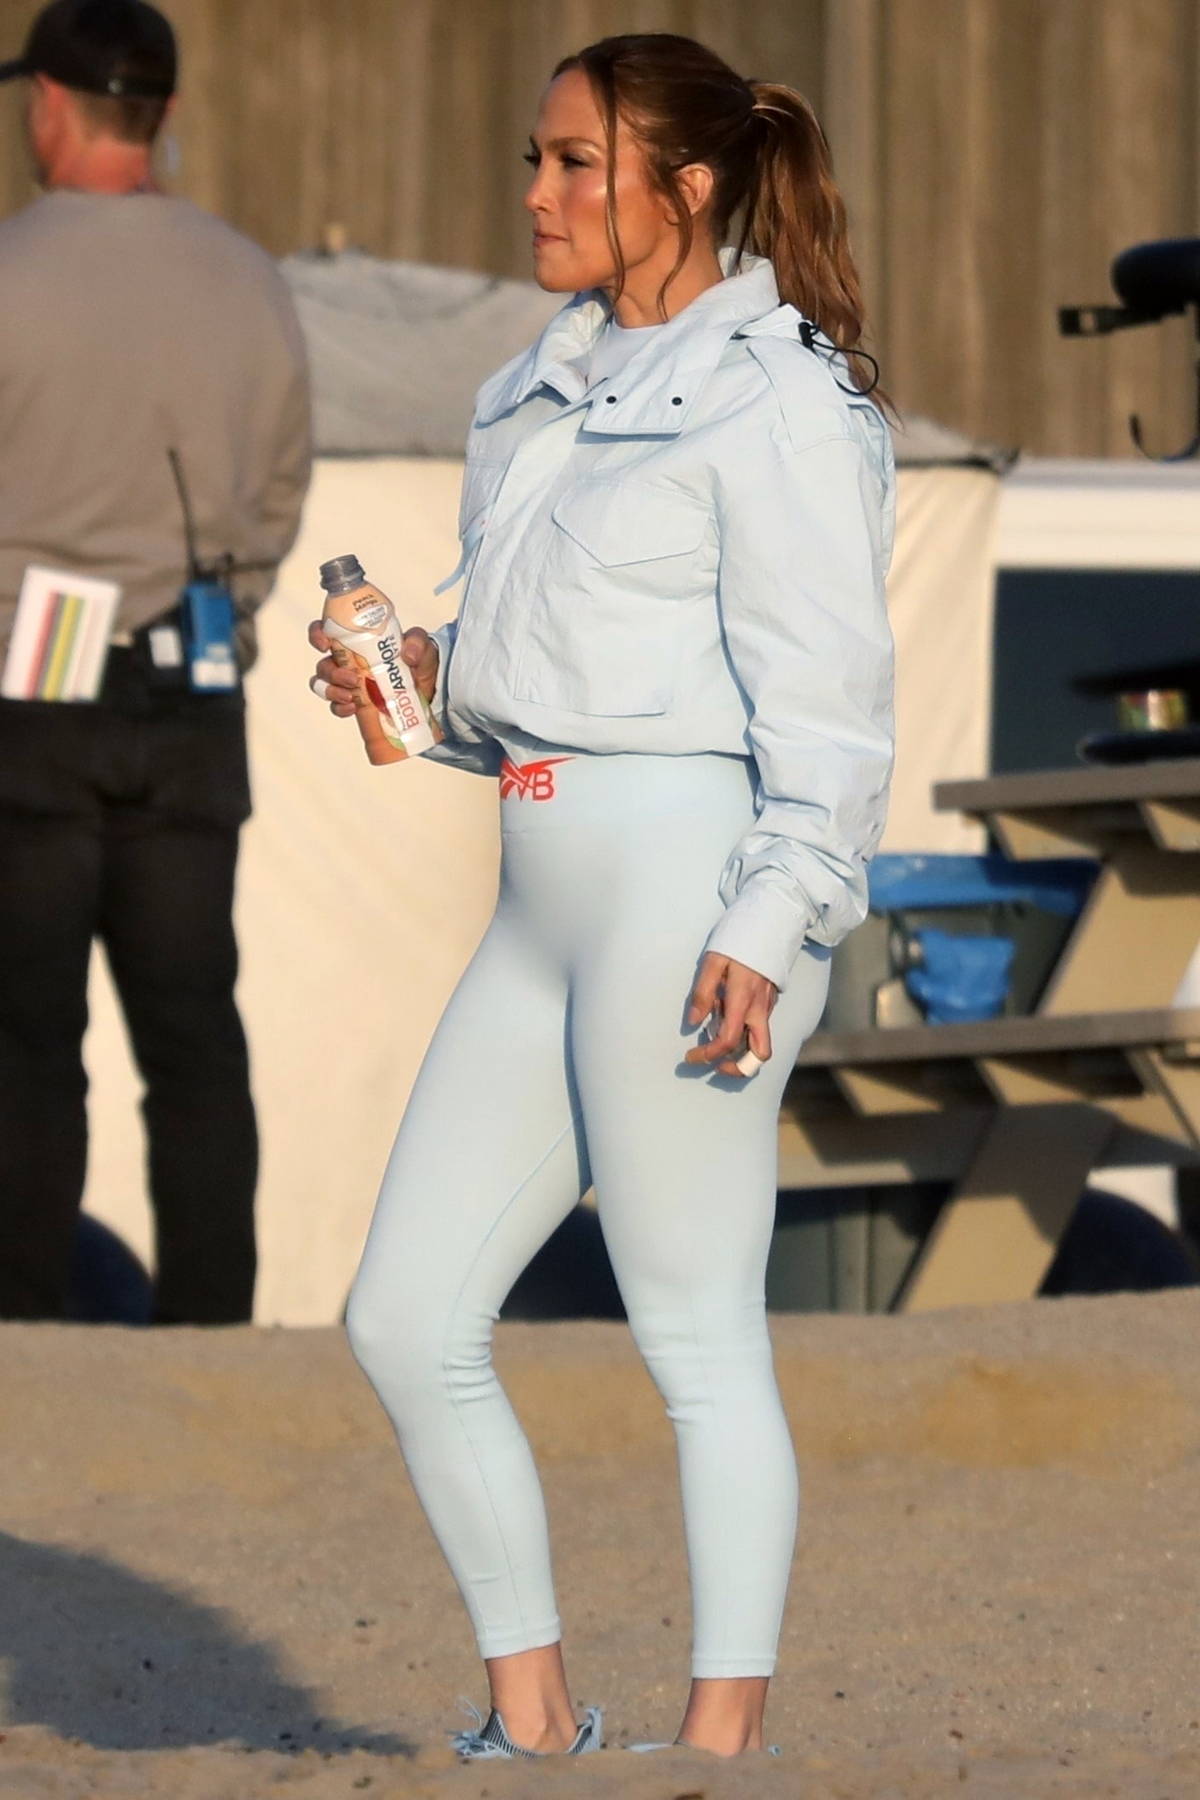 Jennifer Lopez shows off her famous curves in baby blue leggings during a  beach photoshoot in